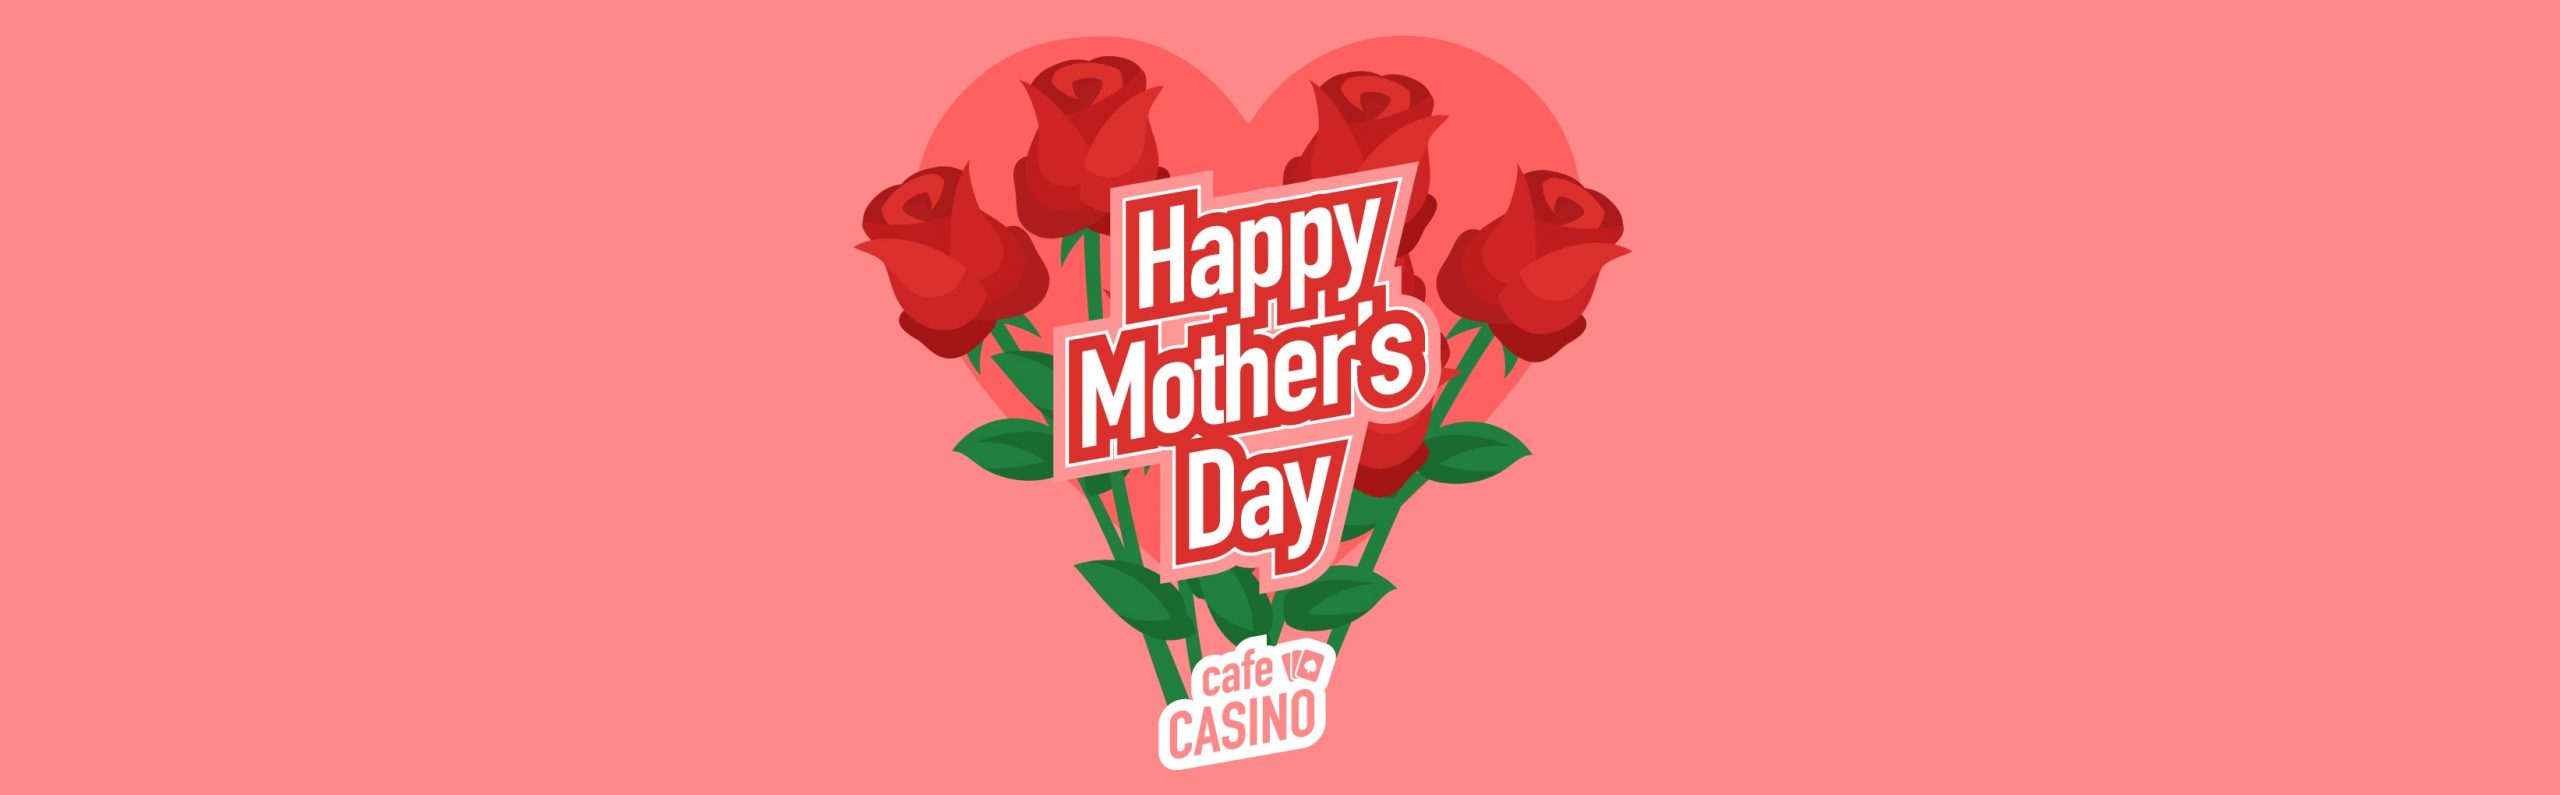 Happy Mother's Day from Cafe Casino!